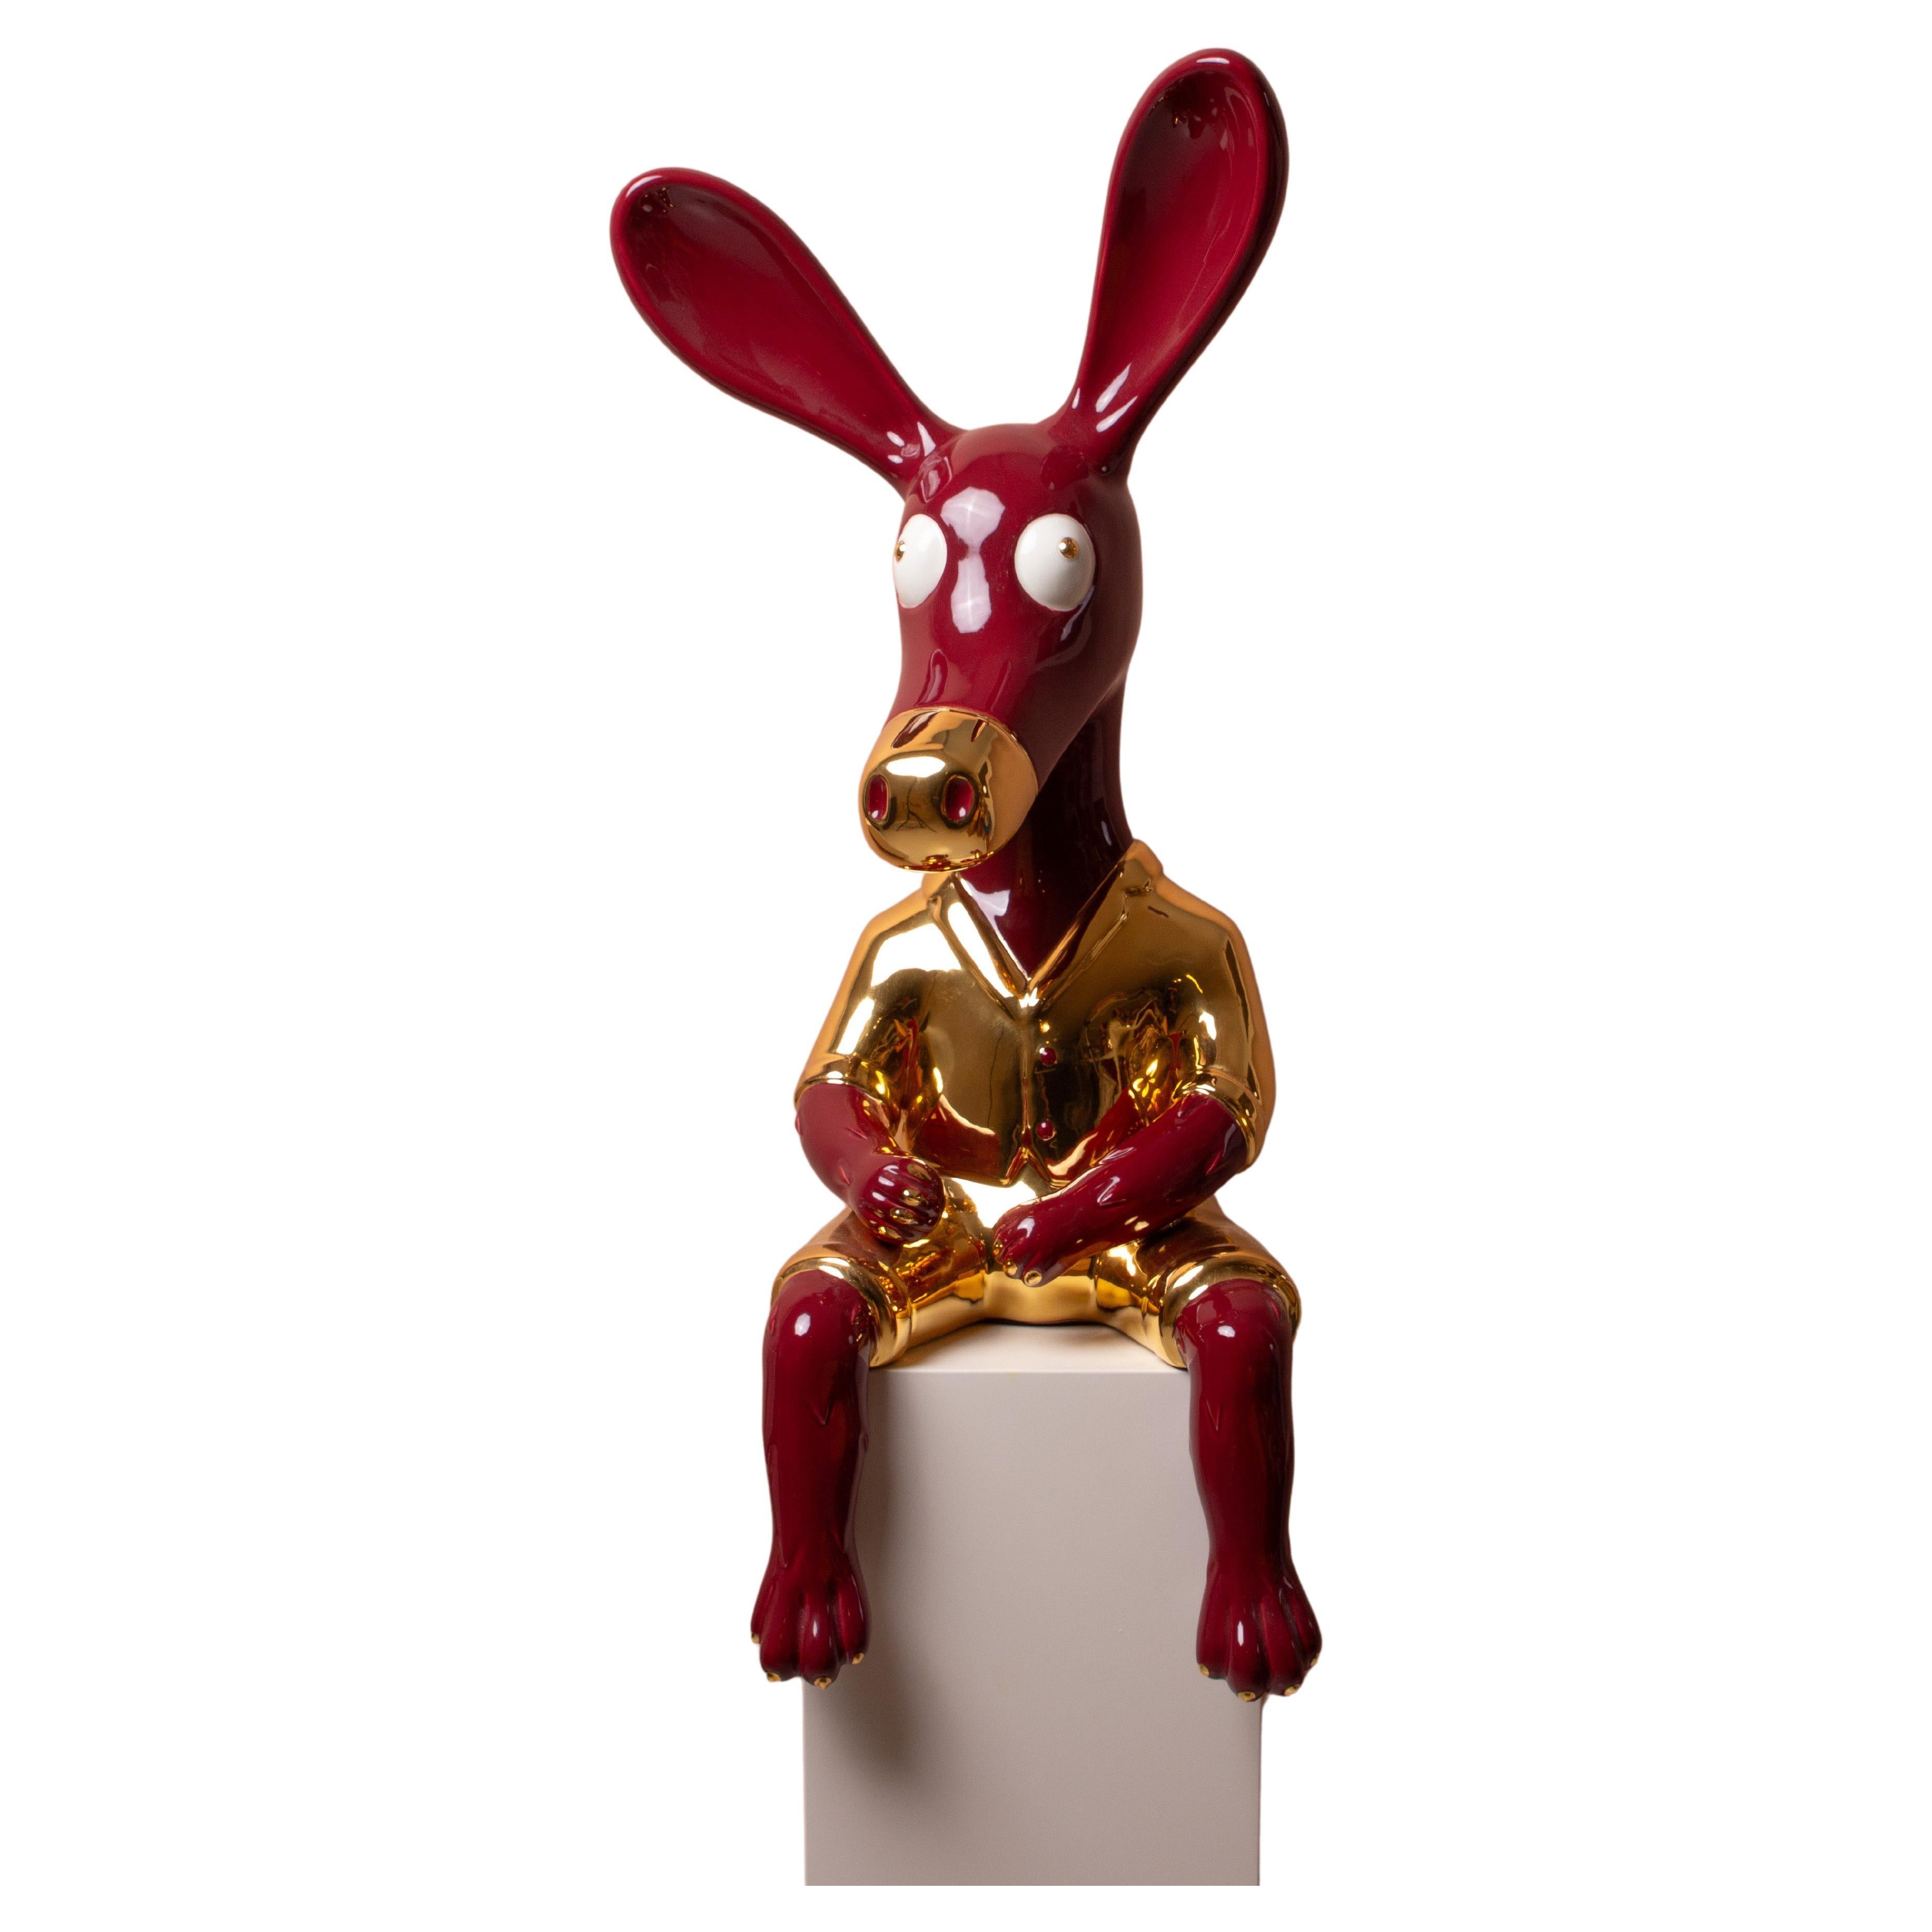 Cherry ang gold donky sculpture, ceramic and 24k gold finish